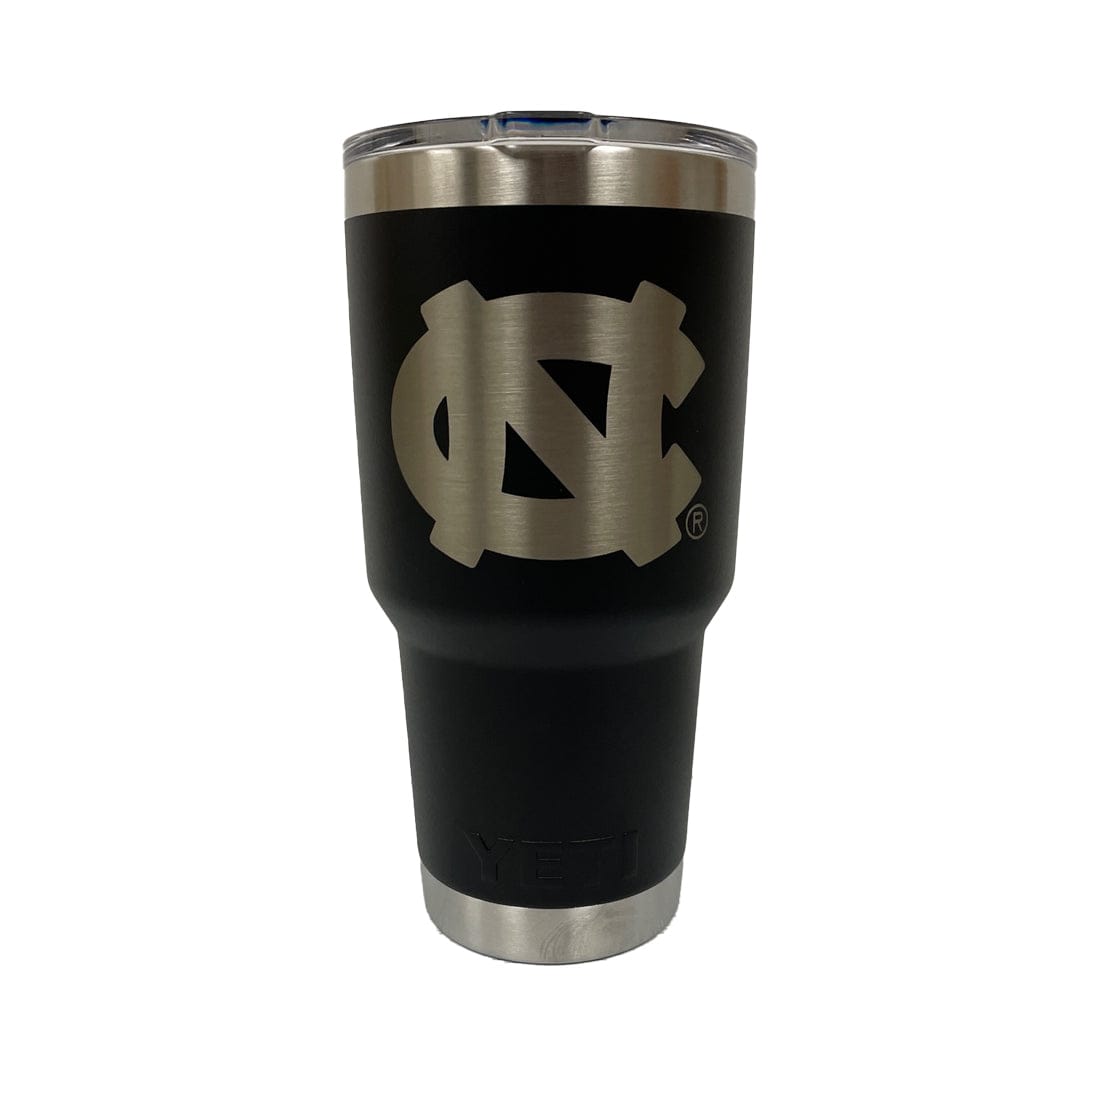 Yeti Rambler 30 Oz. Black Stainless Steel Insulated Tumbler with